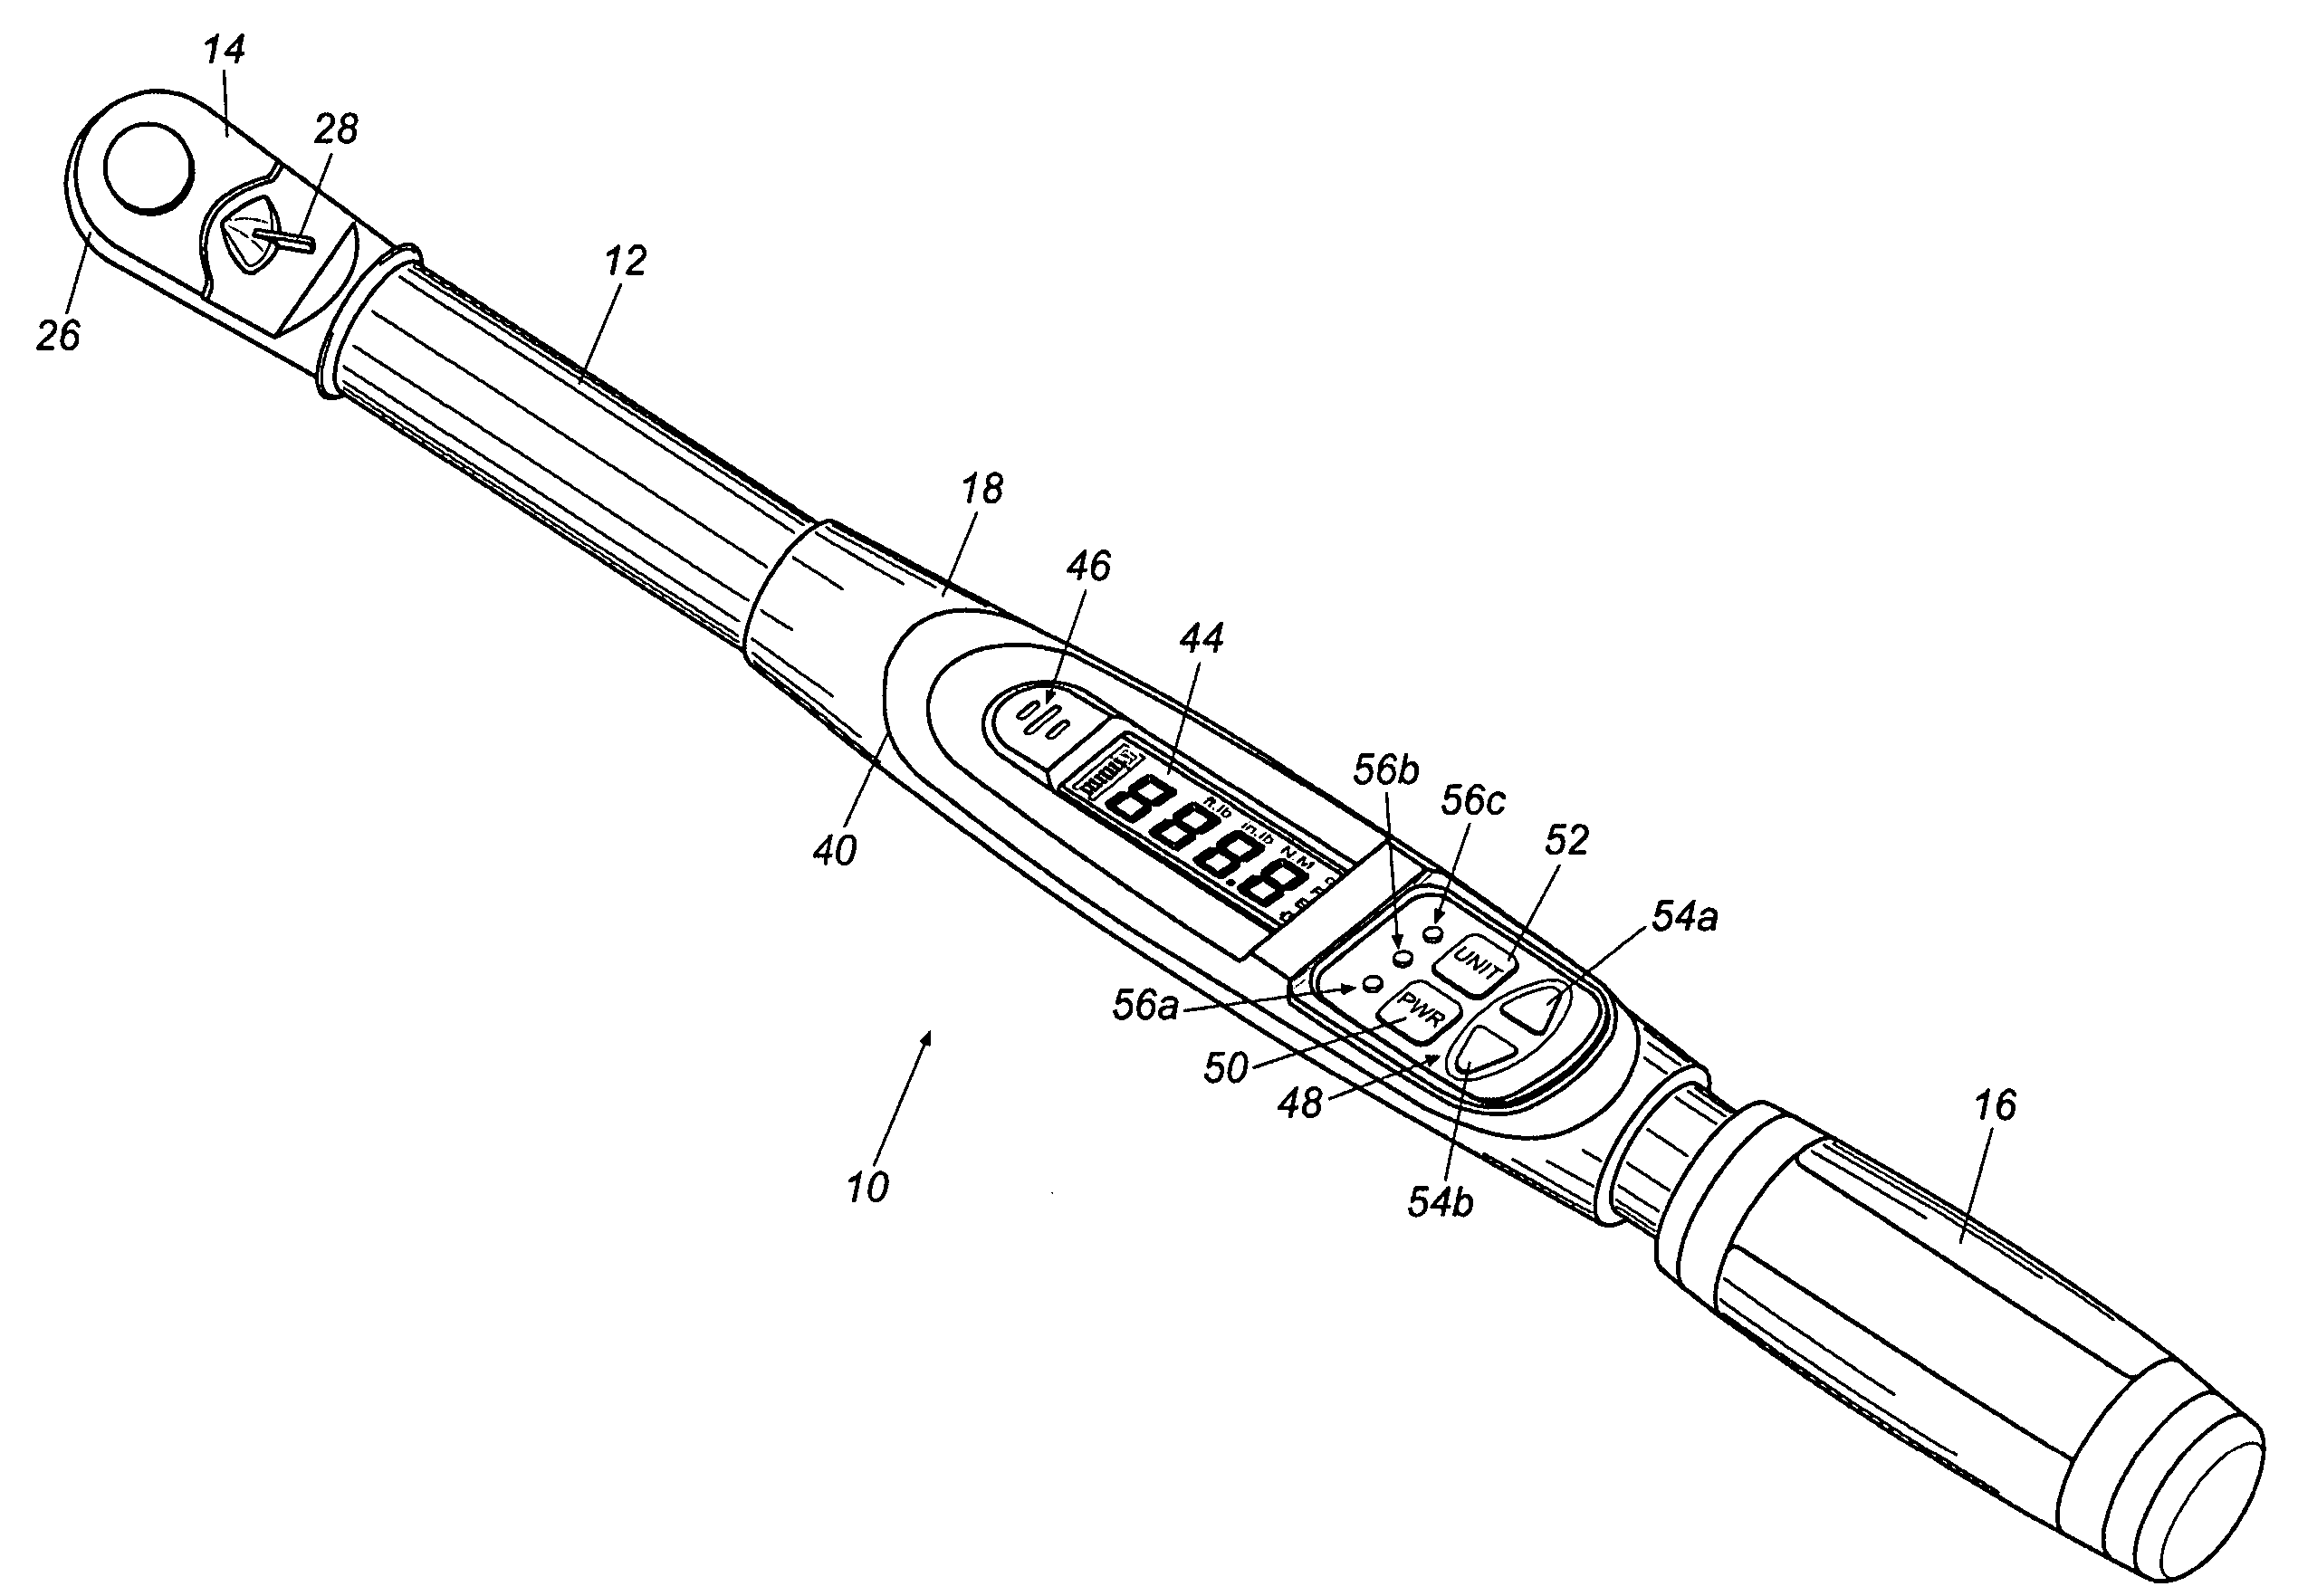 Display device for an electronic torque wrench